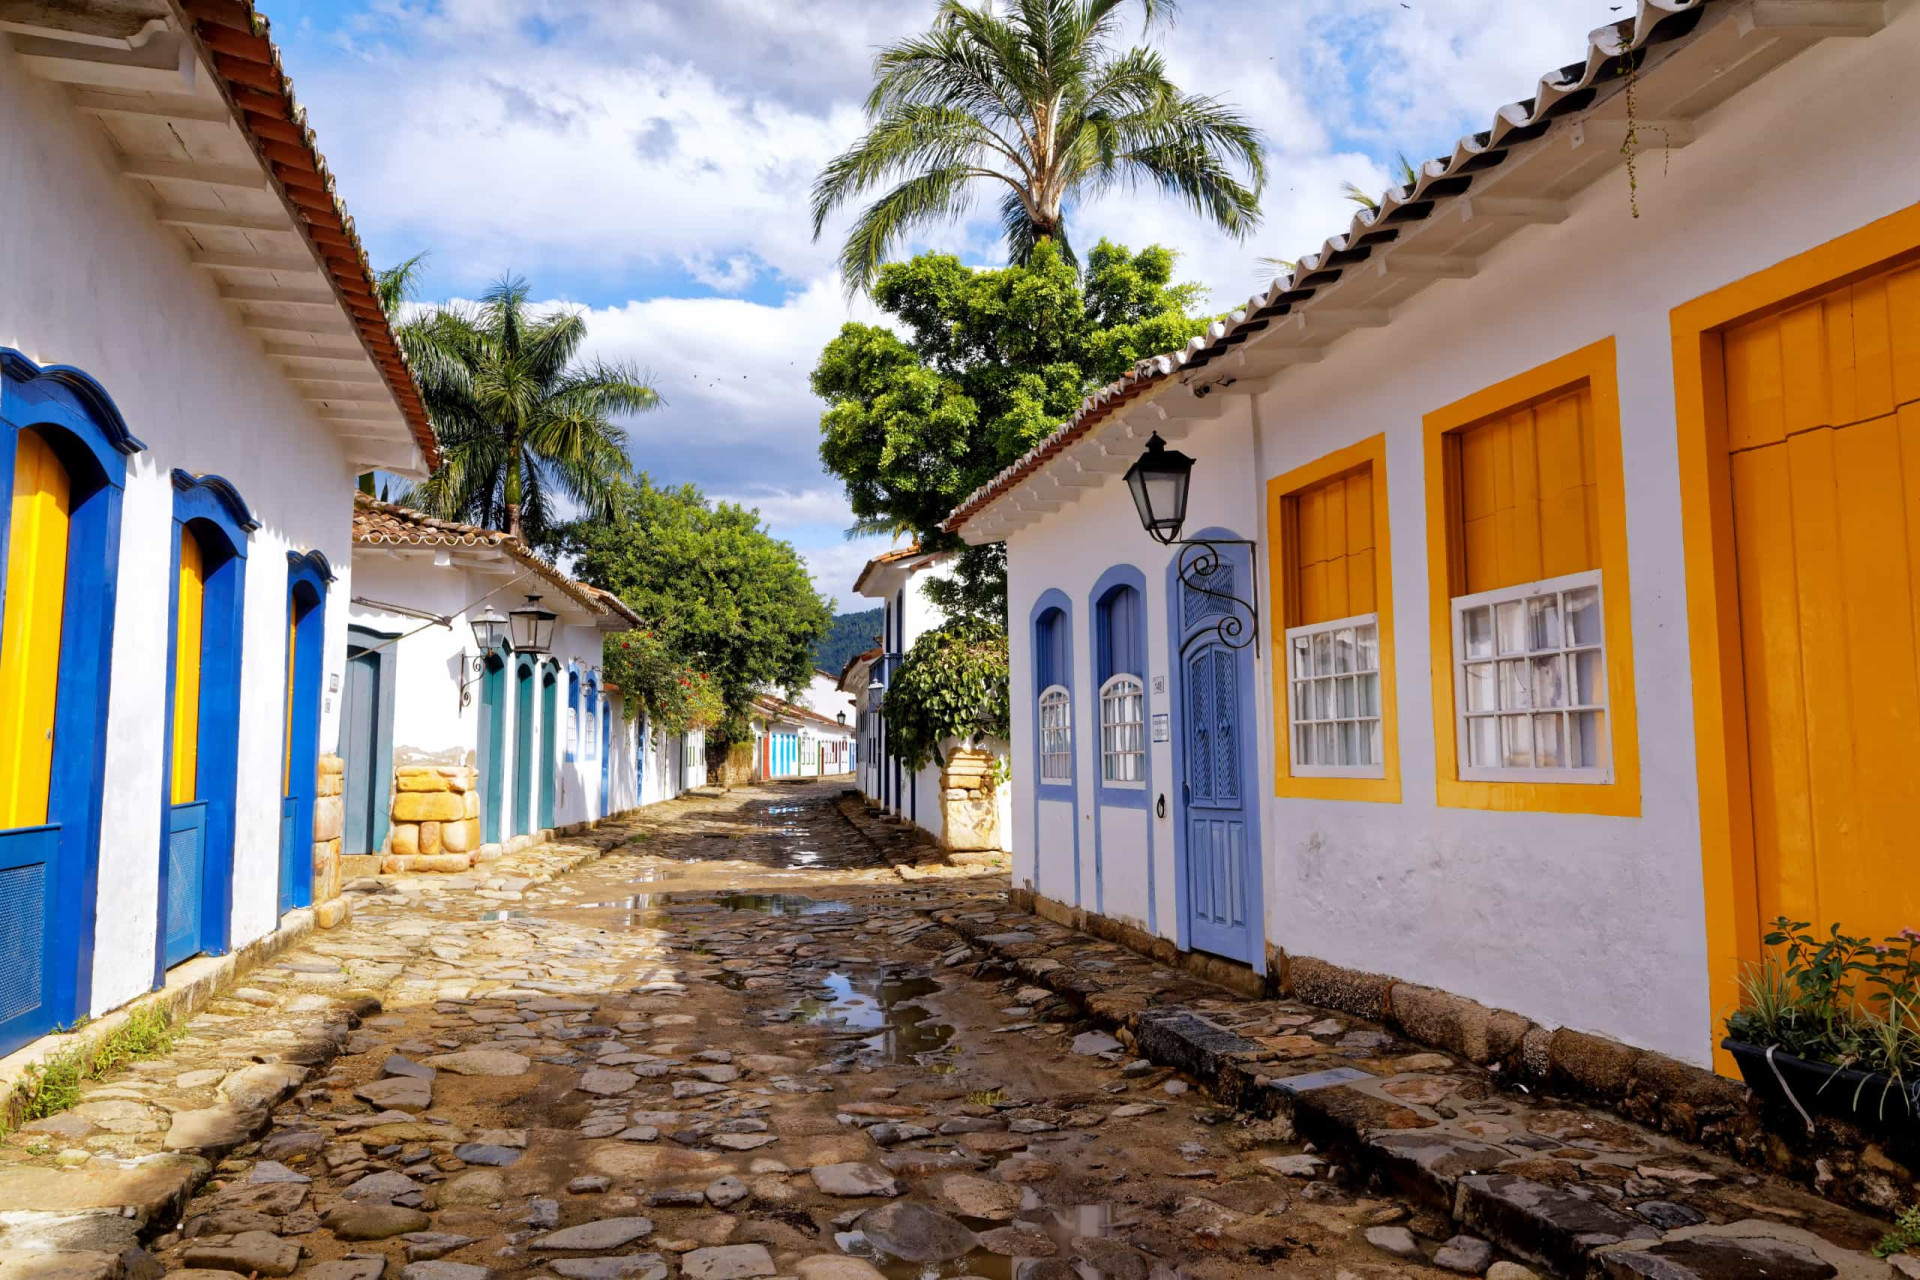 Location: Rio de Janeiro state<br>Criteria: Mixed<br>Year established: 2019<br>Description: This compelling cultural landscape includes the historic center of Paraty, one of the country’s best-preserved Portuguese colonial coastal towns.<p>You may also like:<a href="https://www.starsinsider.com/n/478093?utm_source=msn.com&utm_medium=display&utm_campaign=referral_description&utm_content=413555v12en-us"> Signs that your partner is emotionally unavailable</a></p>